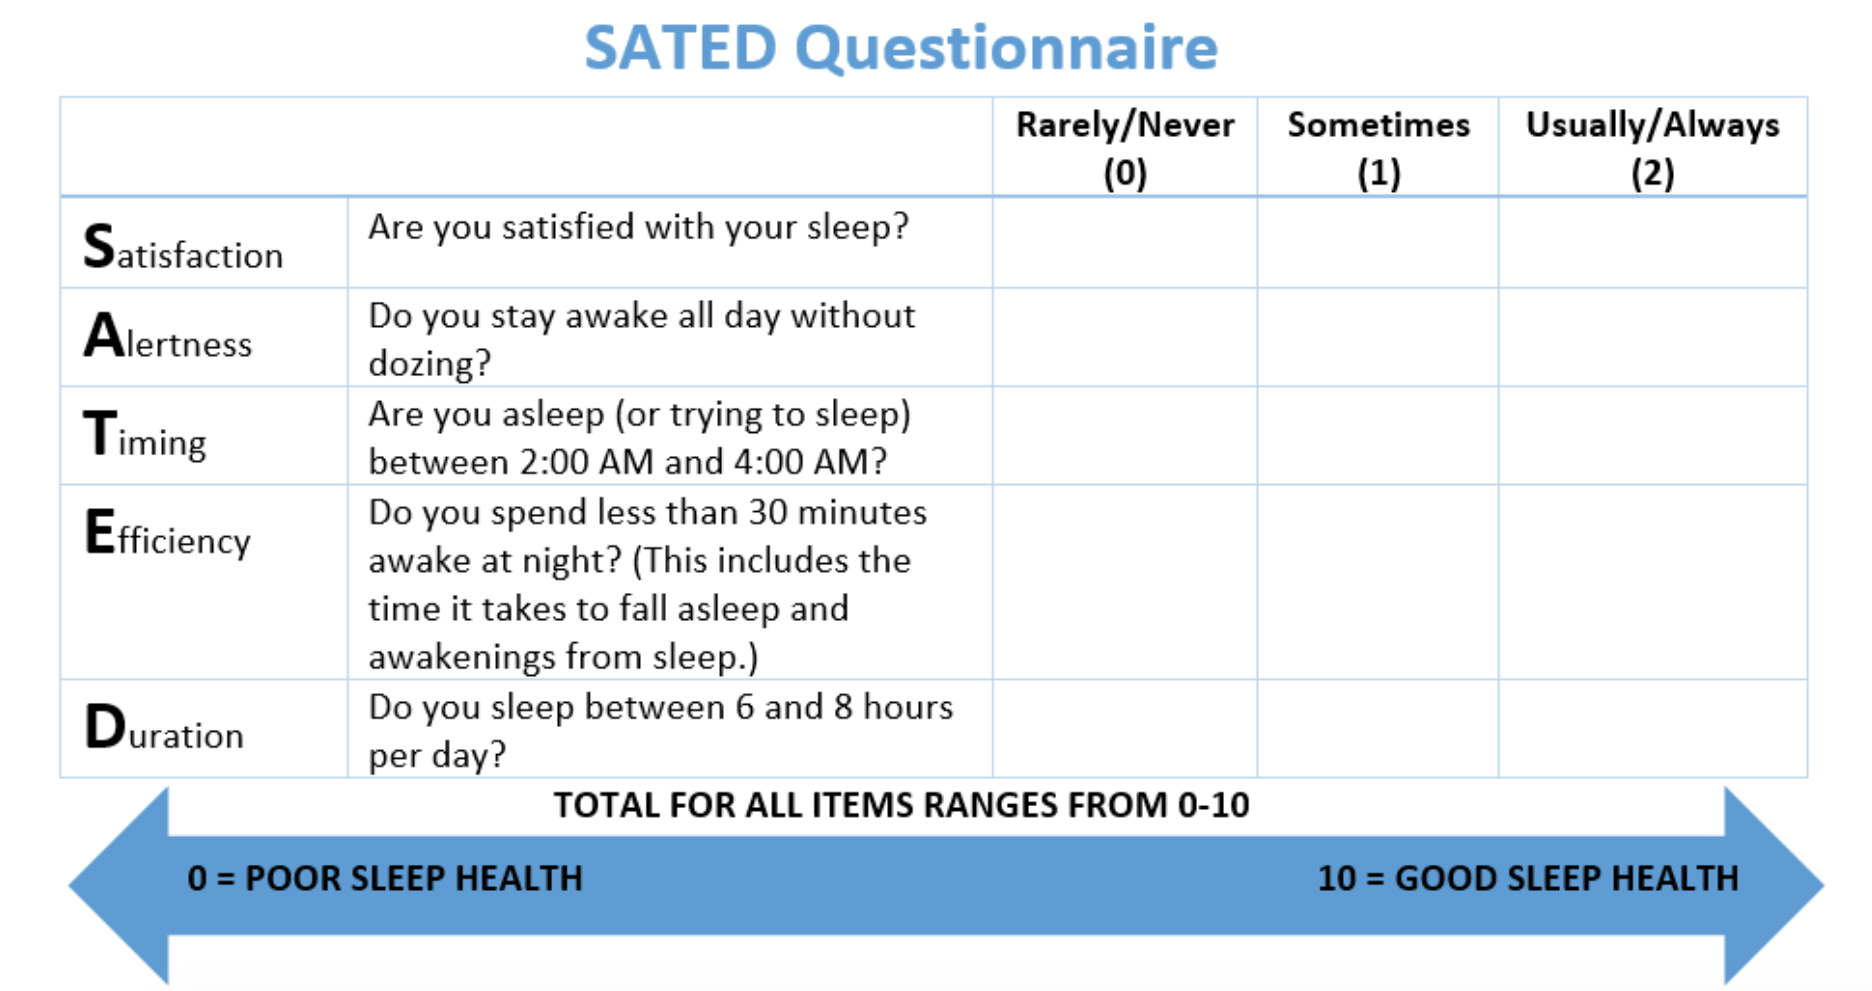 SATED Questionnaire